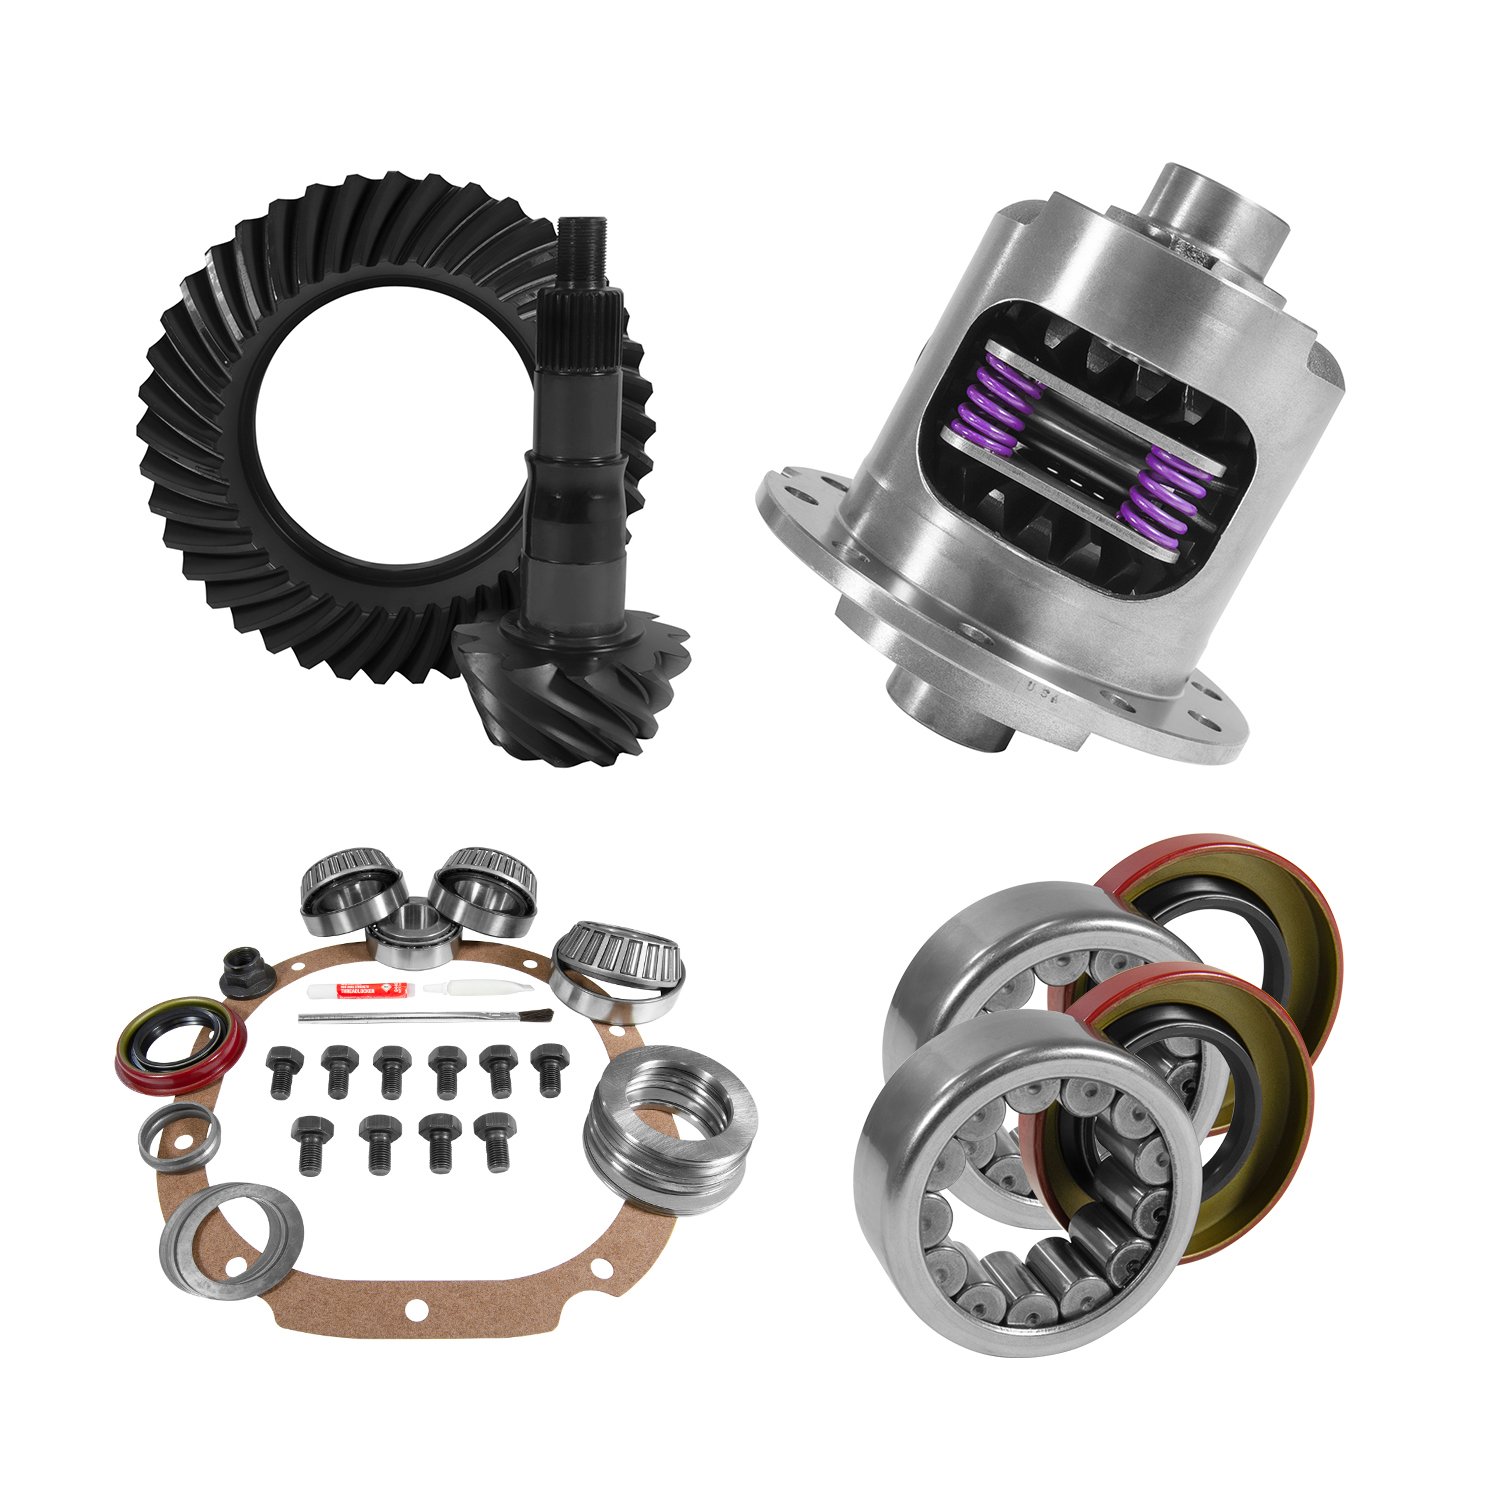 USA Standard 10762 8.8 in. Ford 3.73 Rear Ring & Pinion Install Kit, 31Spl Posi, 2.99 in. Axle Bearings